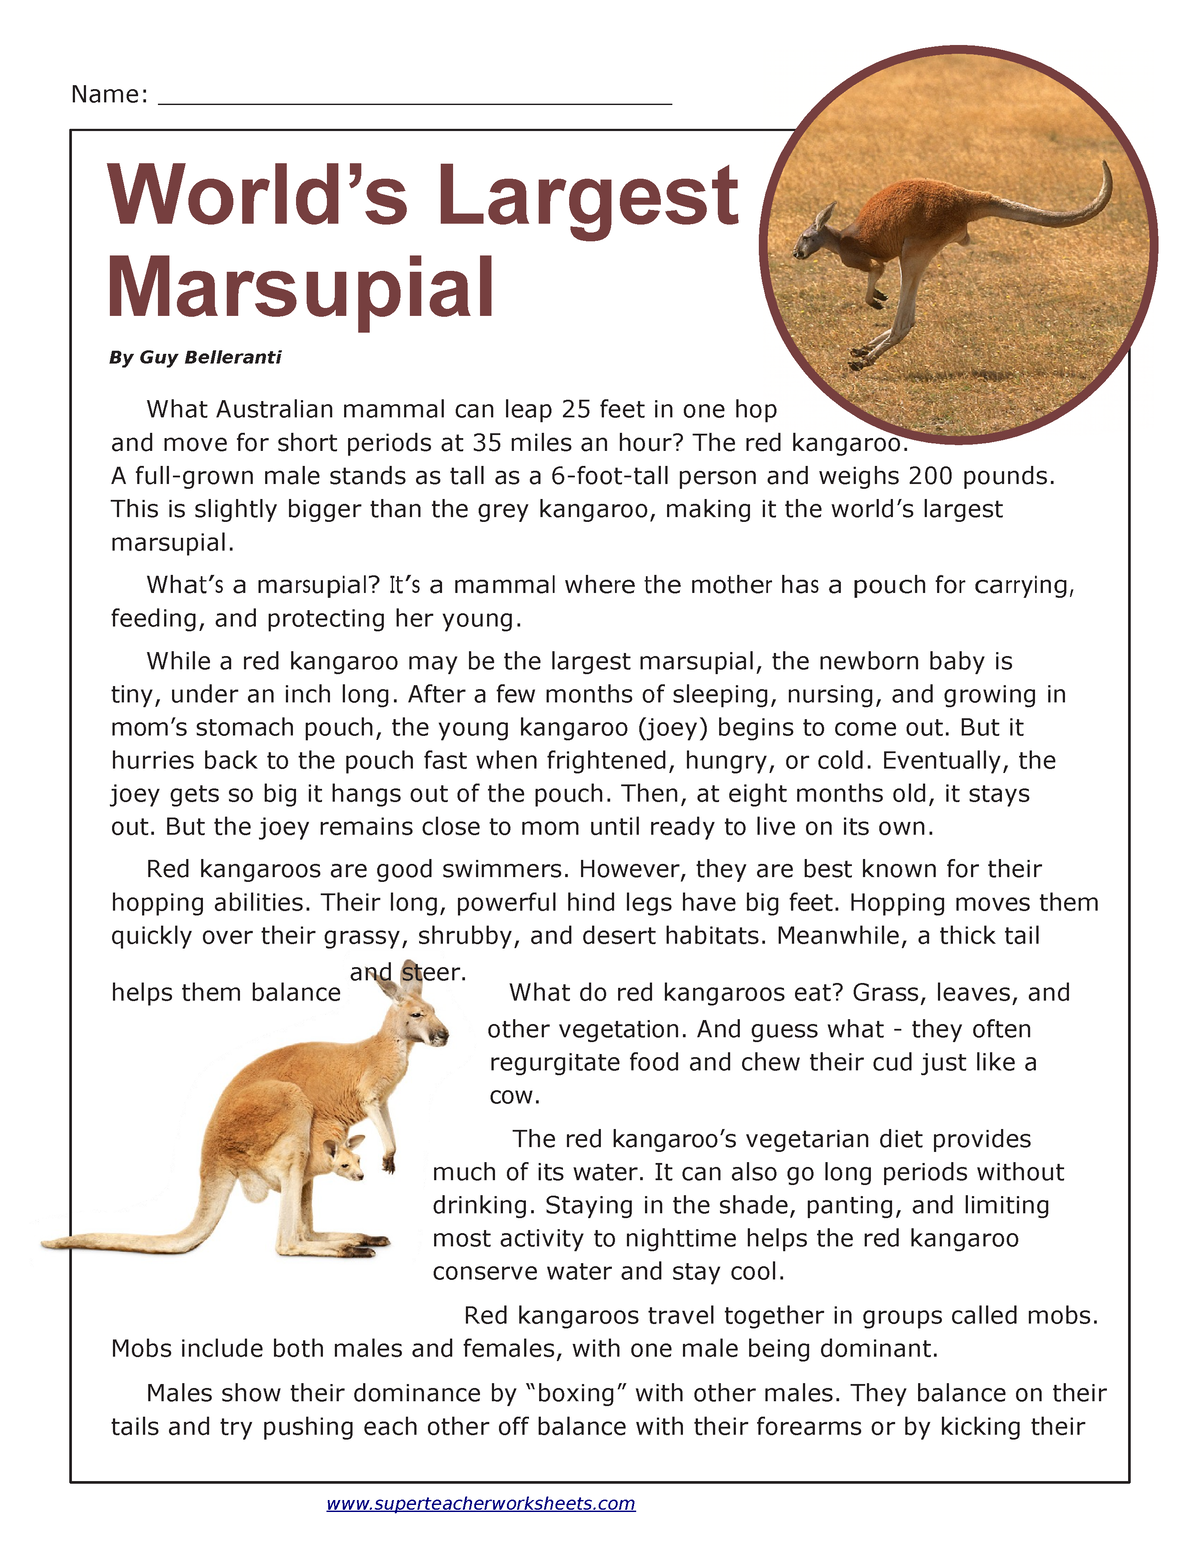 Rocky River Public Library on X: Can you find the joeys in these kangaroo  words? GIGANTIC ALONE CHOCOLATE Can you think of other kangaroo words?  #didyouknow #kangaroowords #words #synonyms #RRPL  /